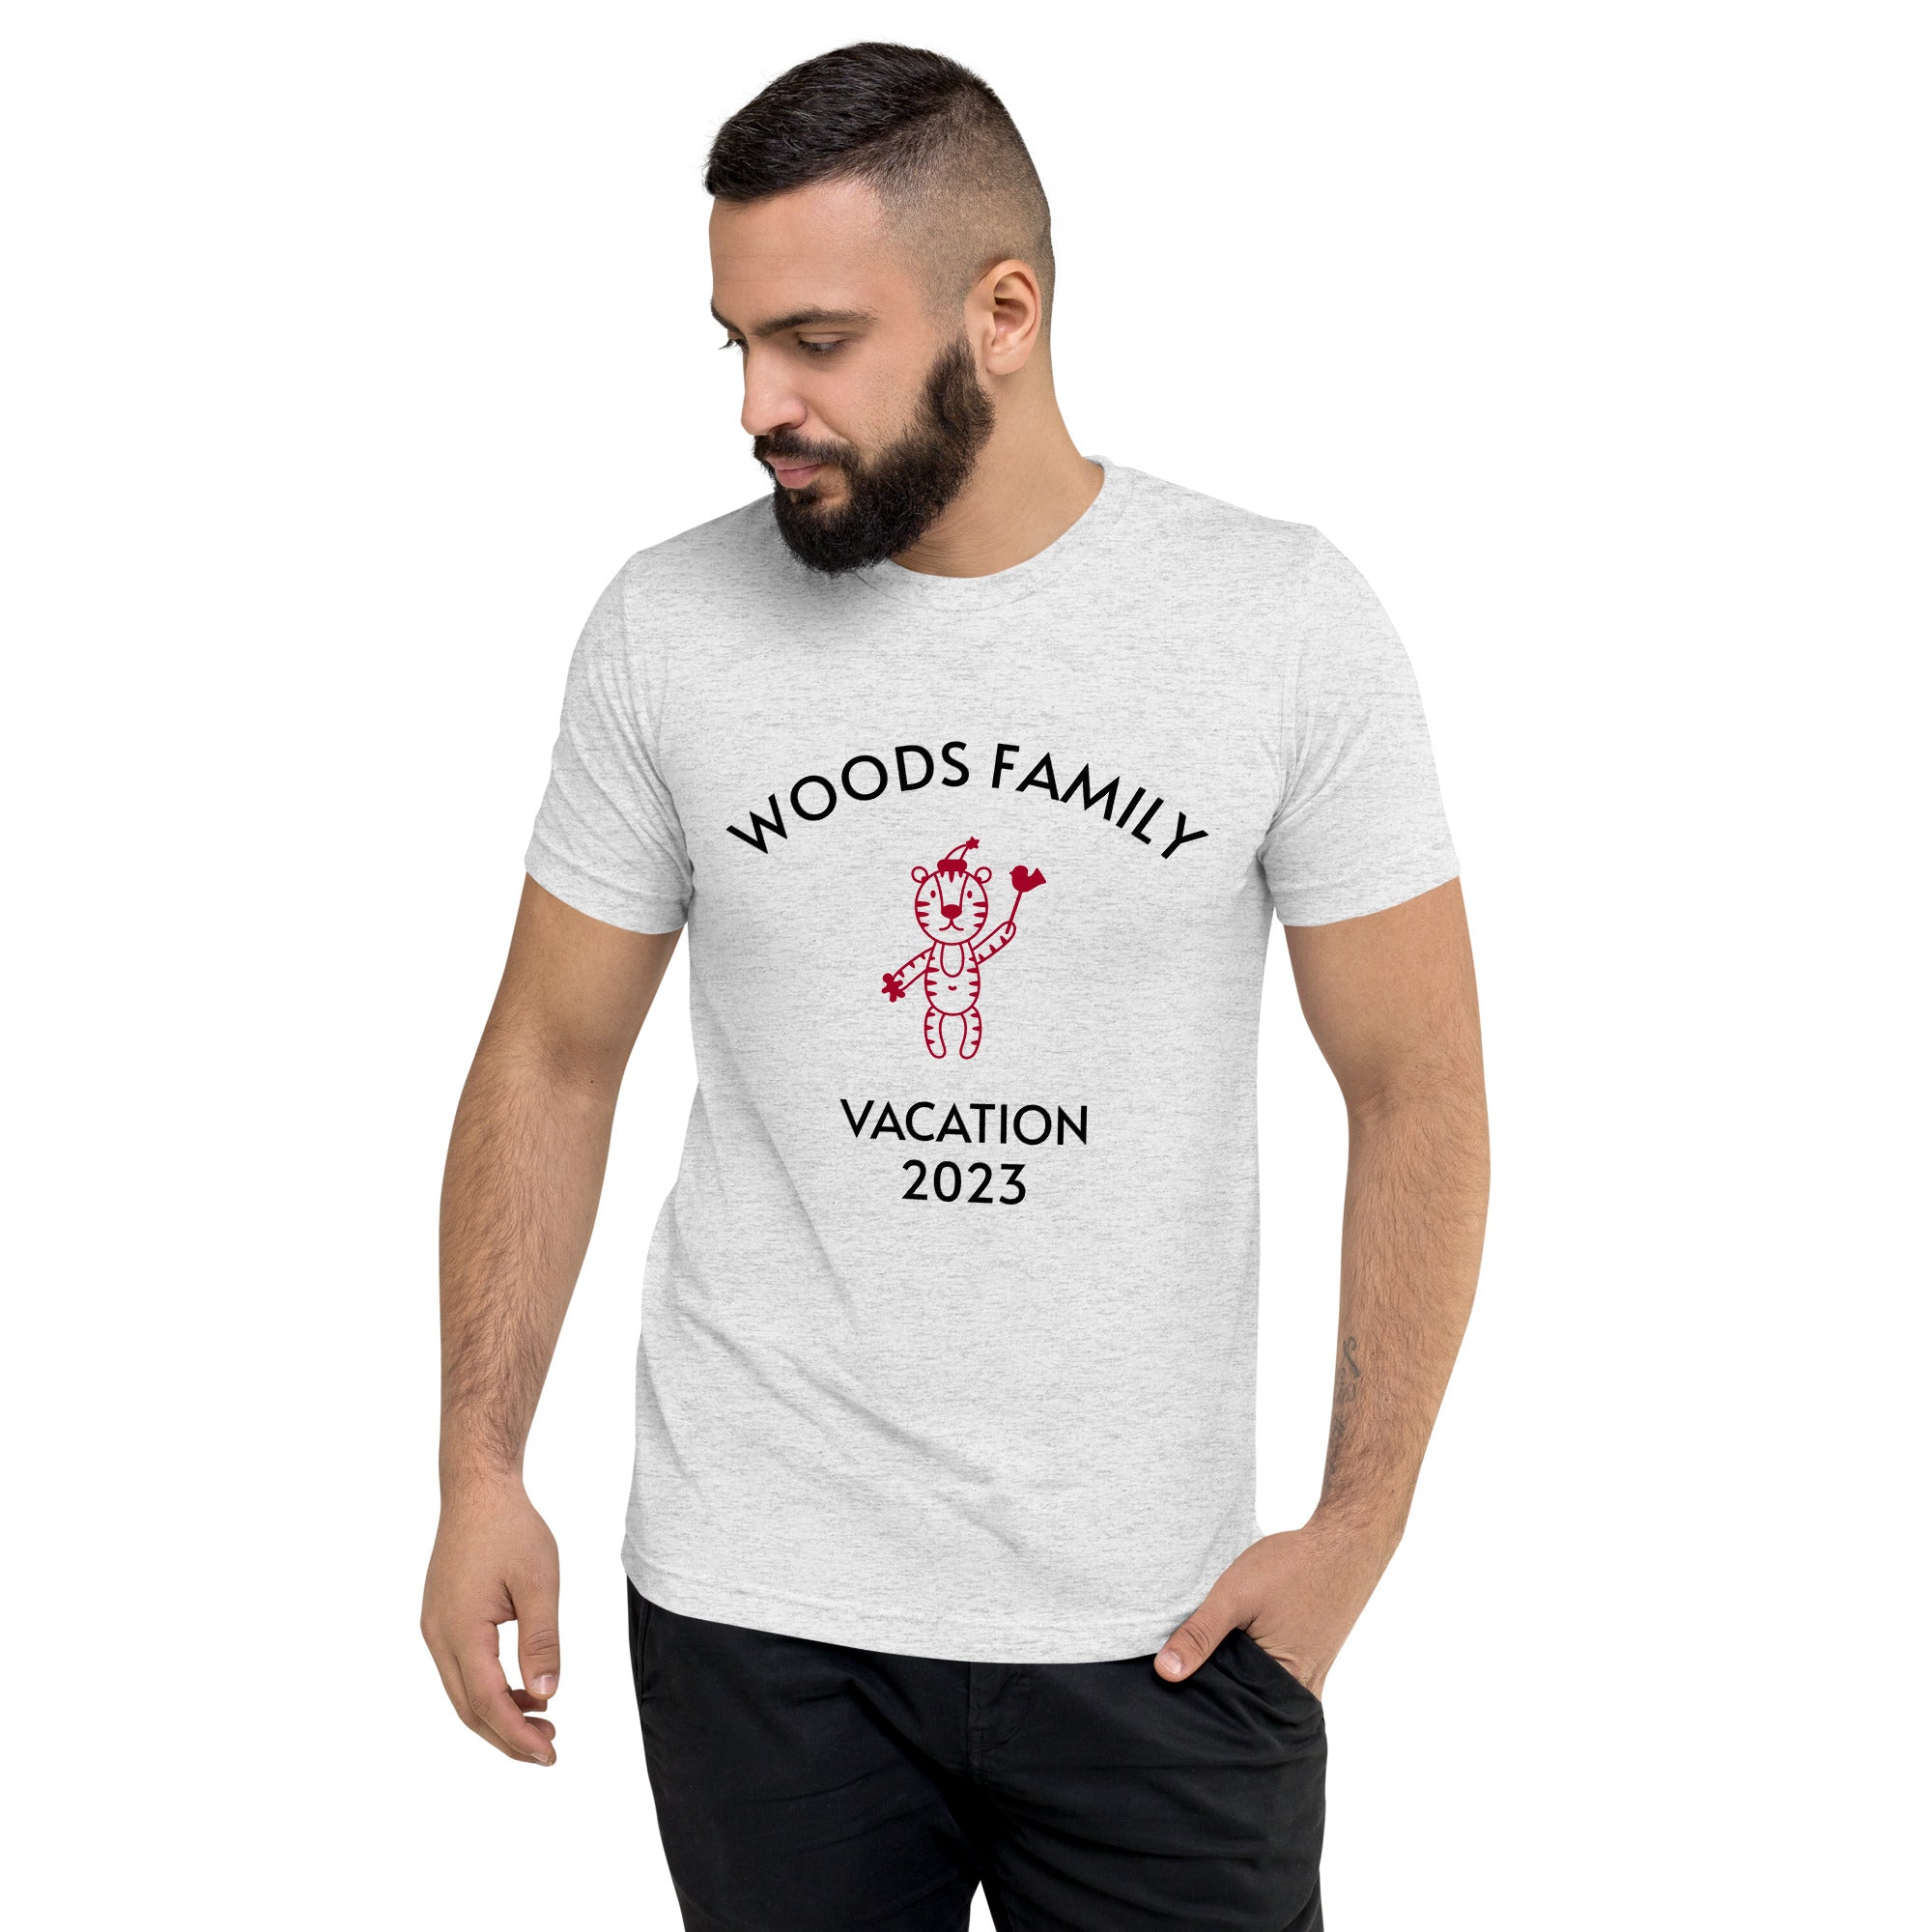 Woods Family Vacation T Shirt